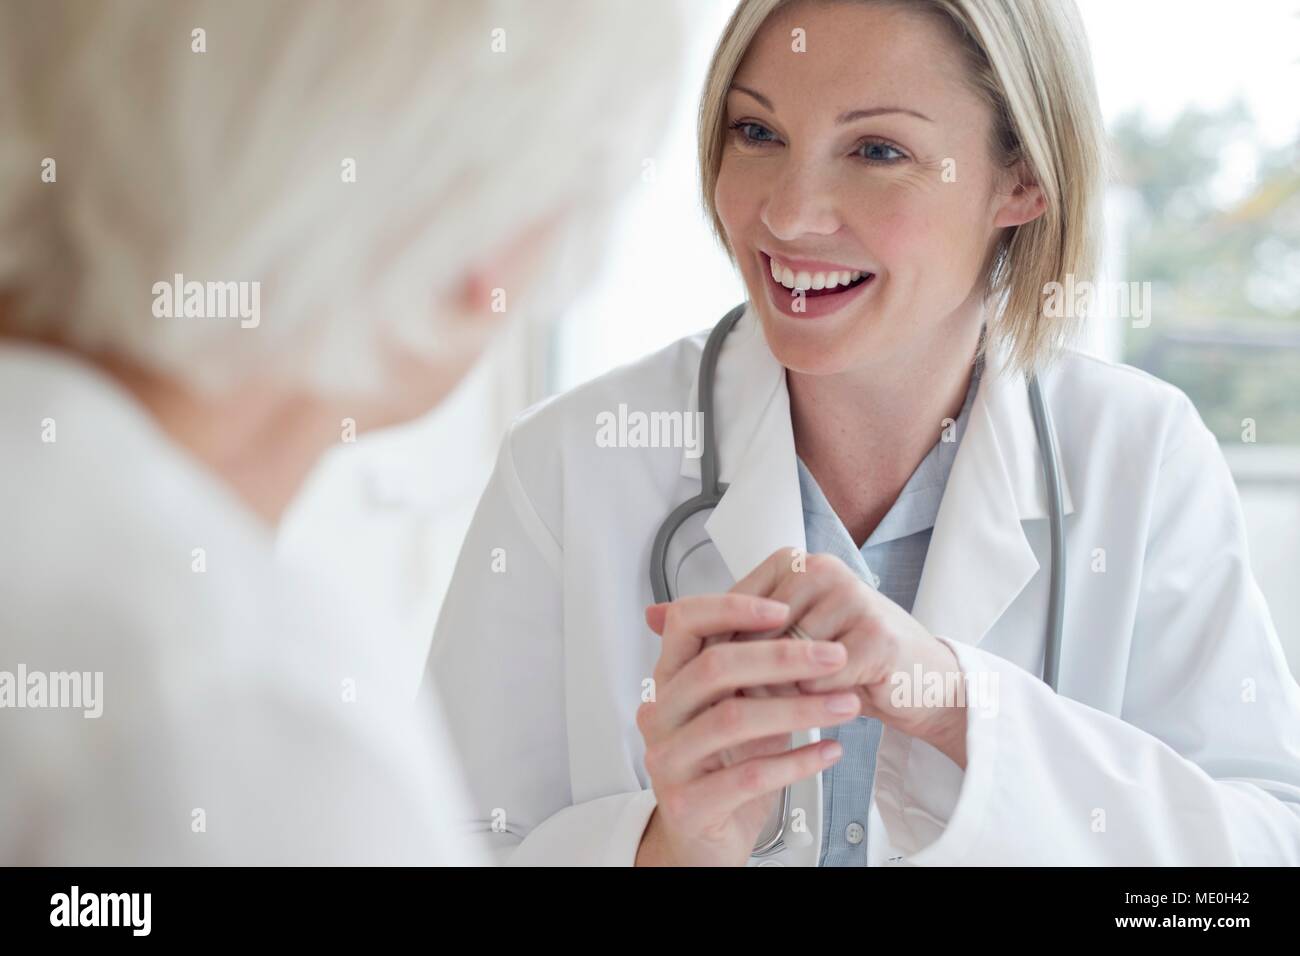 Female doctor smiling towards patient. Stock Photo